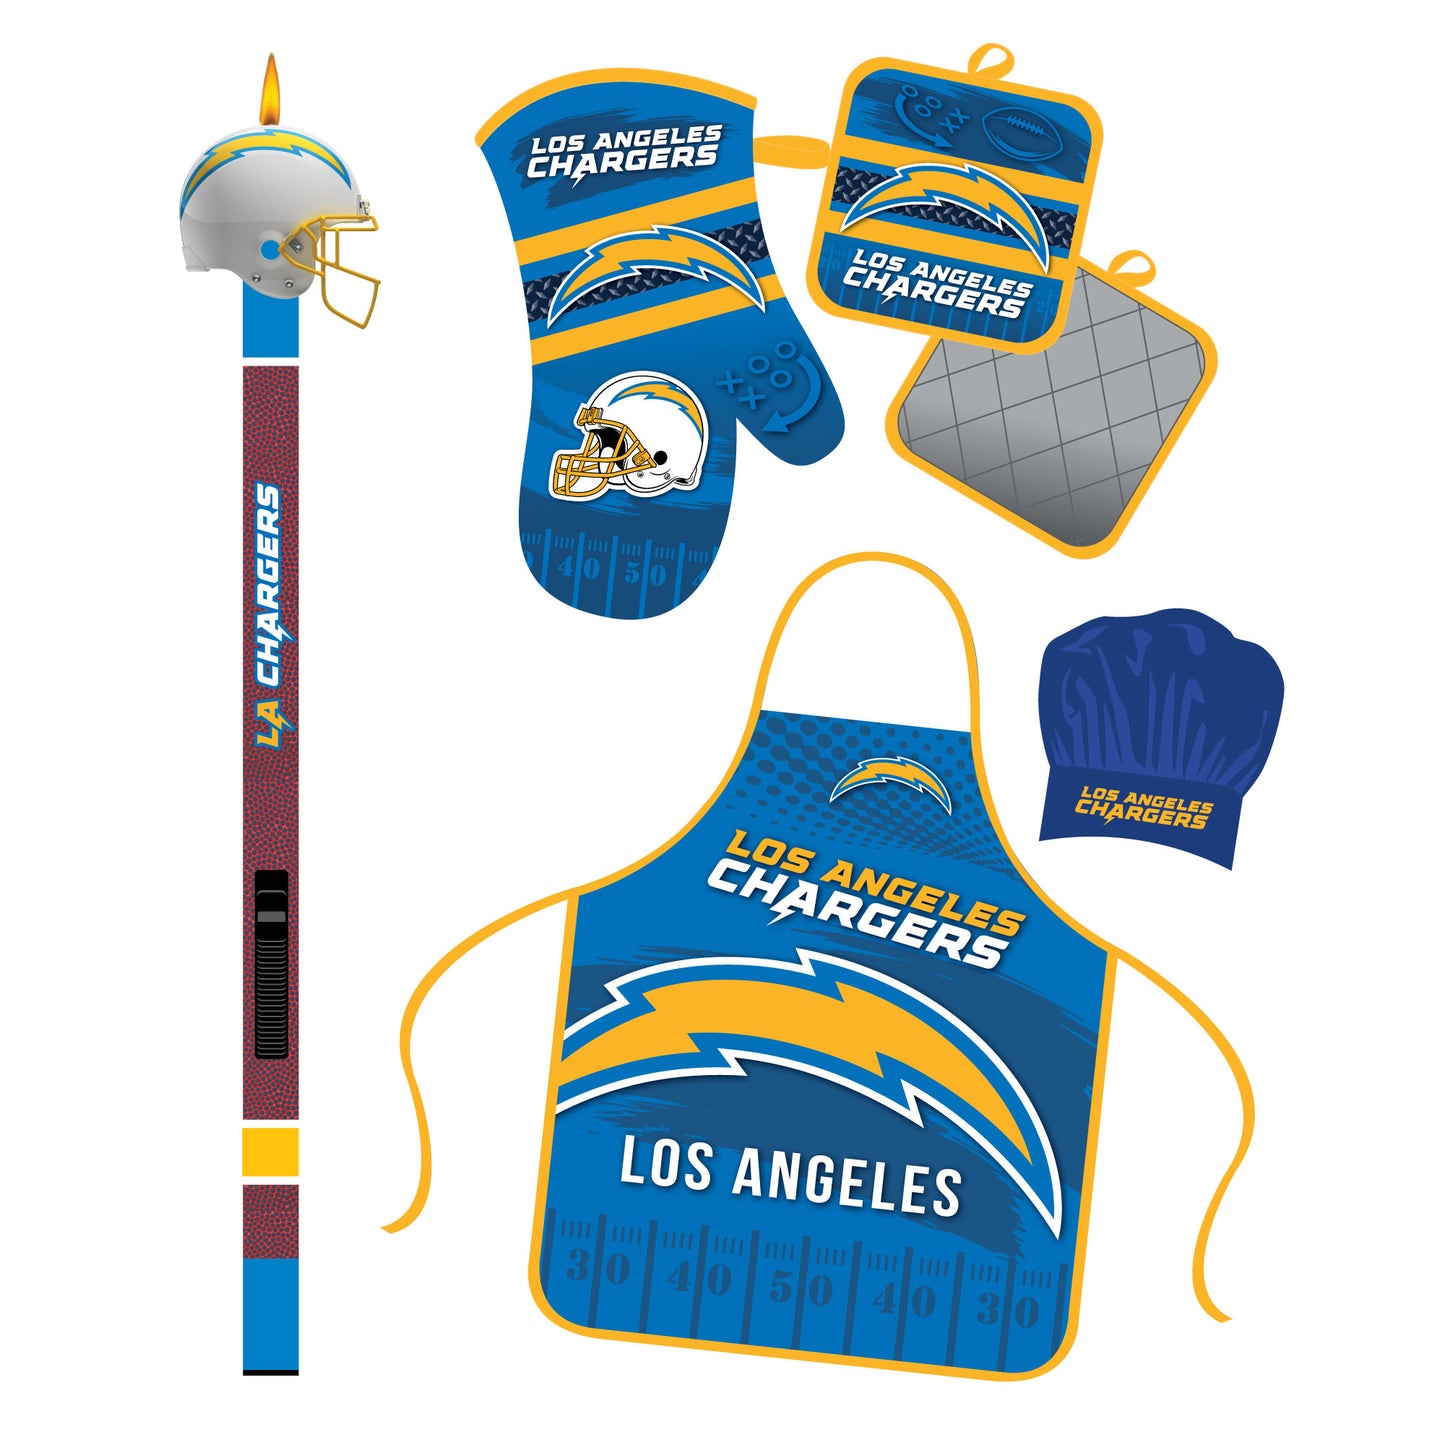 Los Angeles Chargers BBQ Bundle